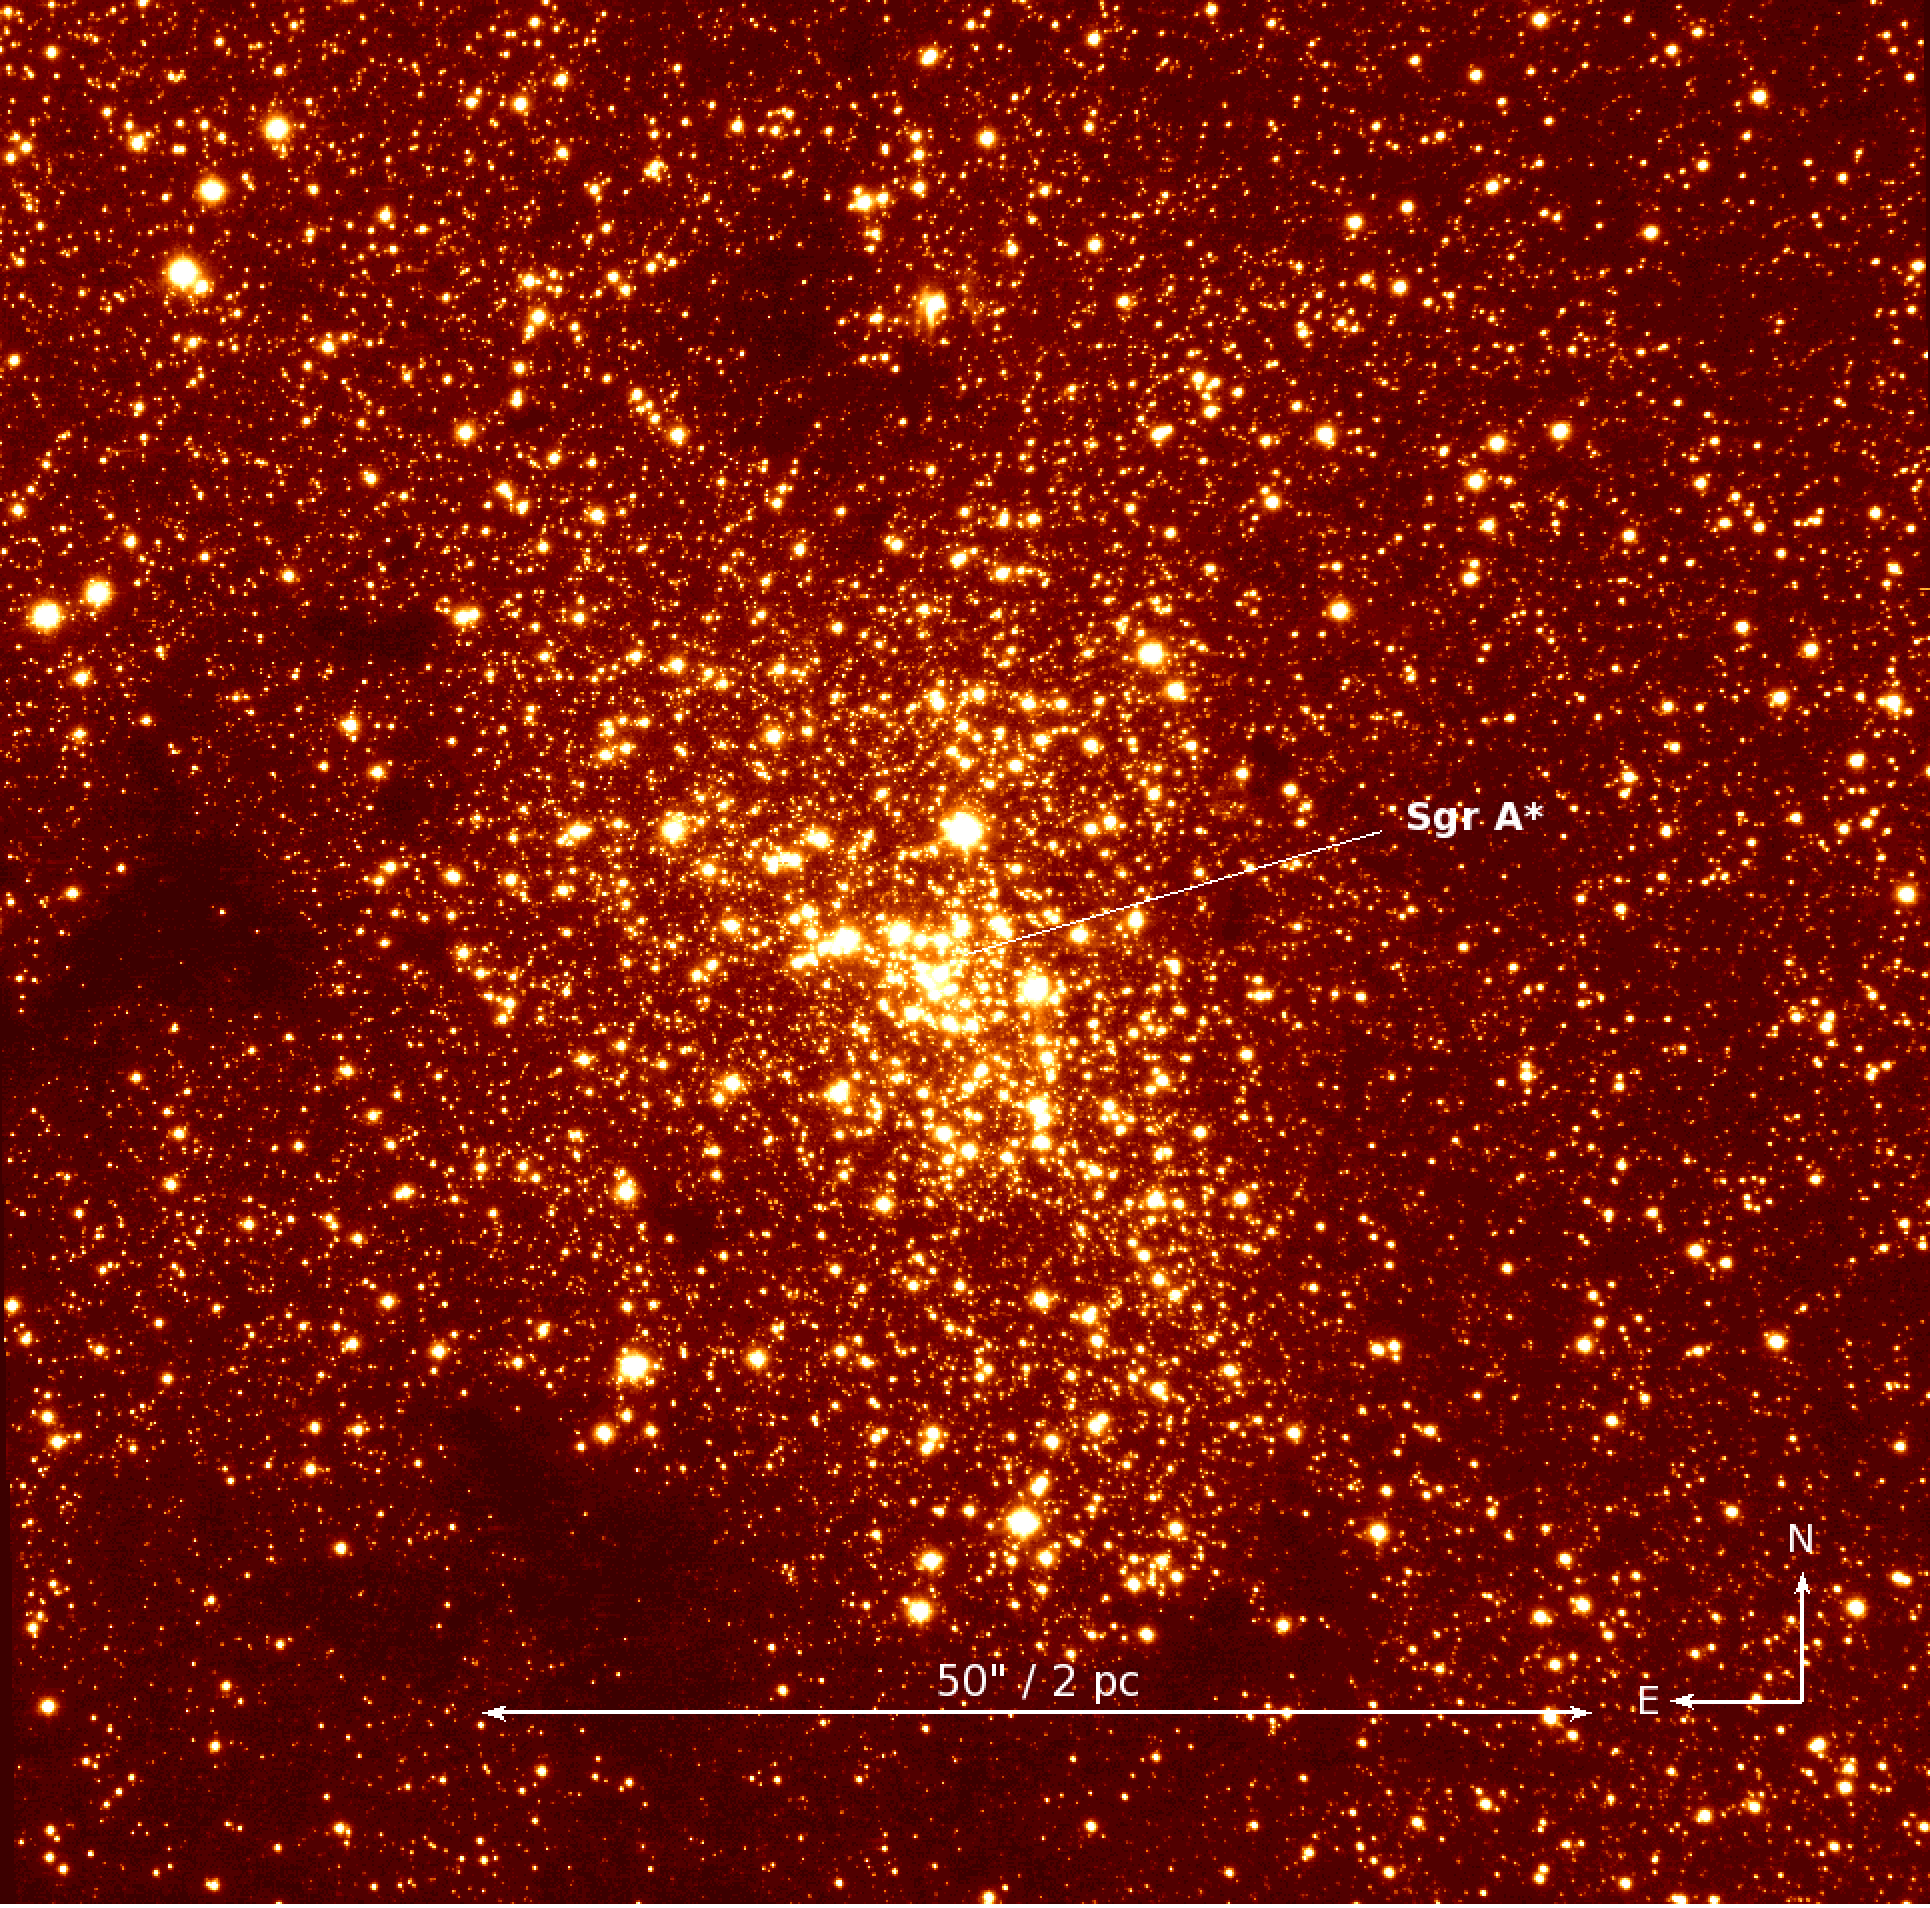 The Galactic Centre, High angular resolution near infrared image (2.2 µm, 0.07” angular resolution), obtained with the ESO VLT instrument NACO